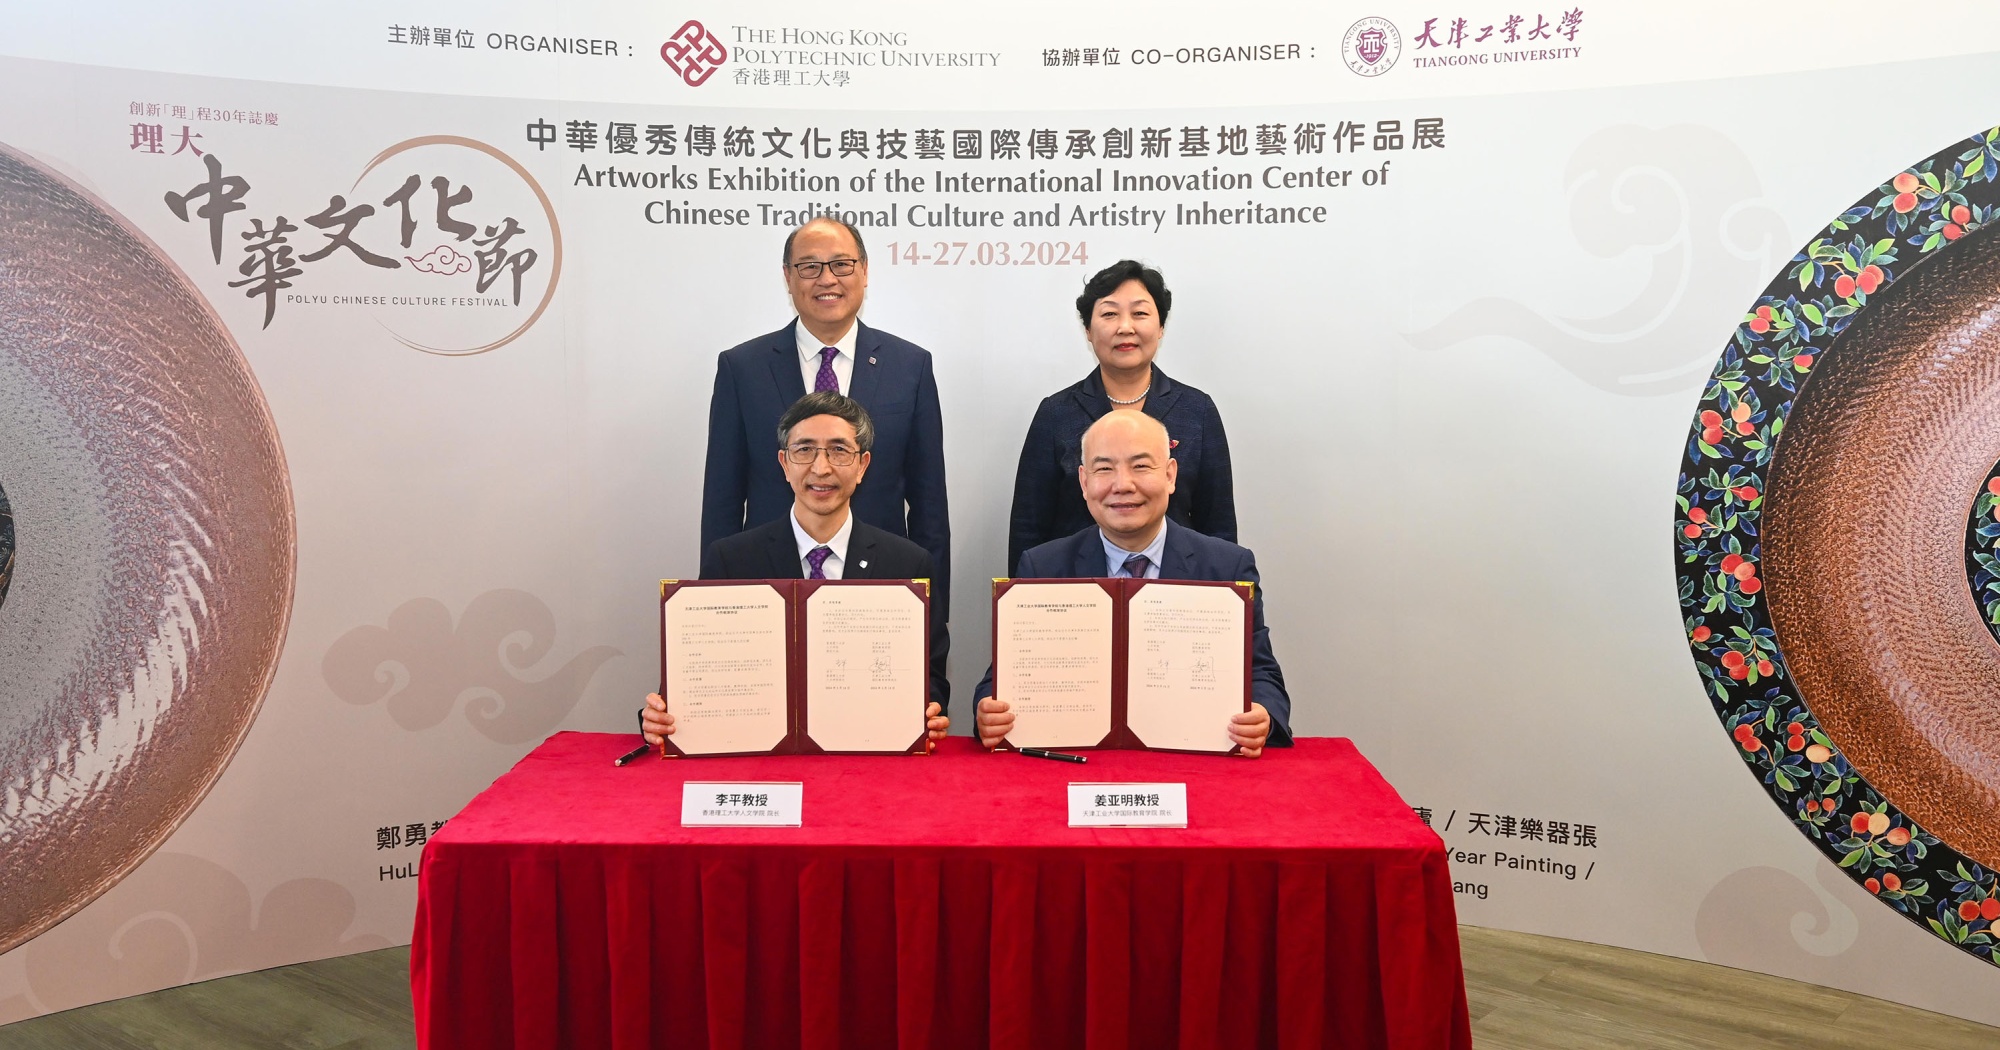 Witnessed by Dr Lam Tai-fai, PolyU Council Chairman (back row, left); and Ms Shen Jiang, Secretary of the Party Committee at Tiangong University (back row, right), the MoU was signed by Prof. Li Ping, Dean of the Faculty of Humanities of PolyU (front row, left); and Prof. Jiang Yaming, Dean of the School of International Education and Director of Hong Kong, Macao and Taiwan Affairs Office of Tiangong University (front row, right), to reinforce academic exchange and collaboration on scientific research projects.